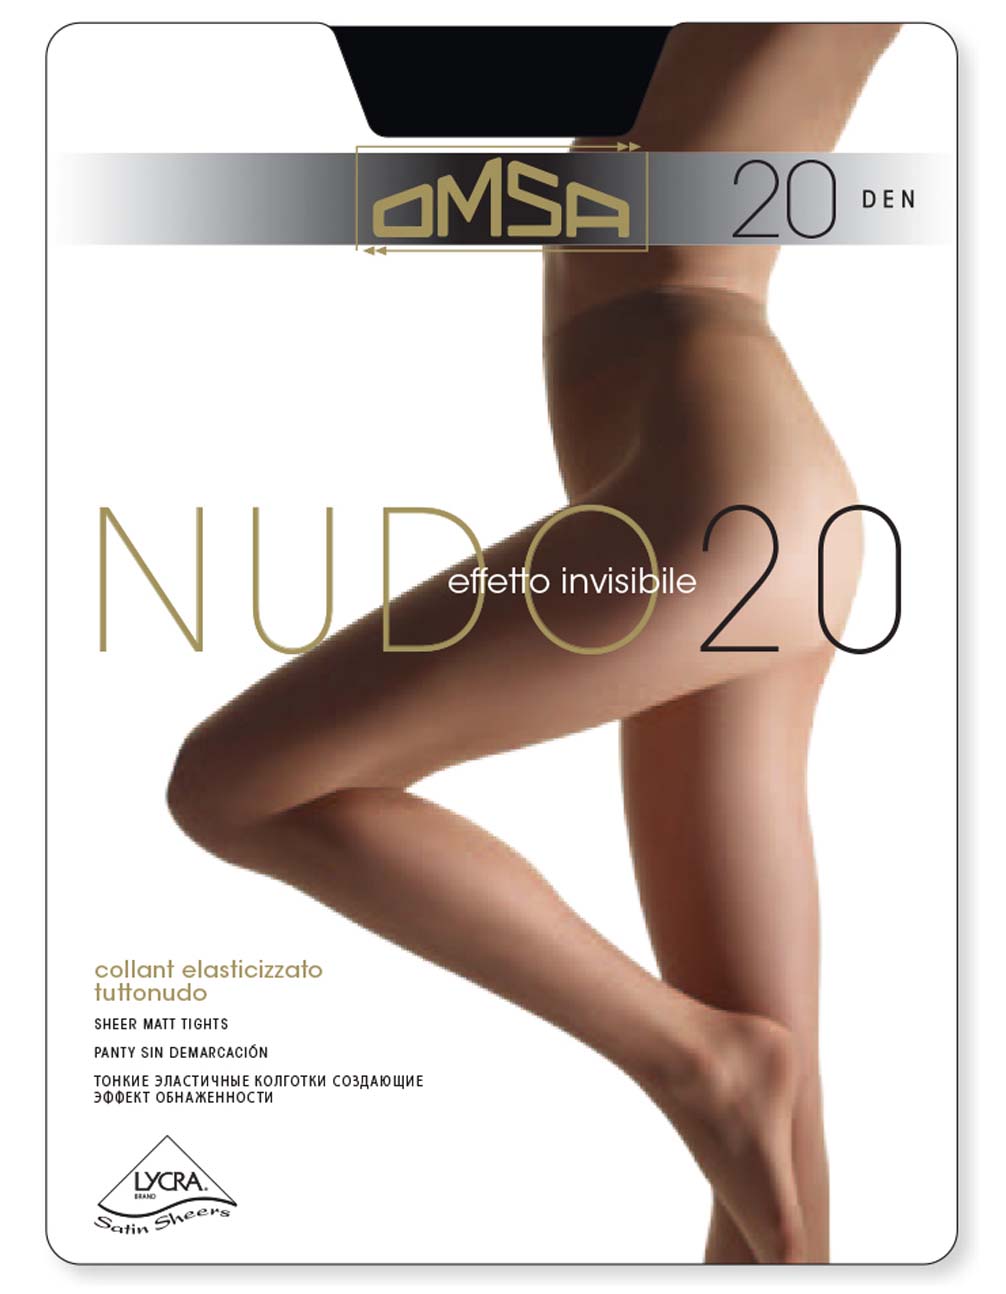 Omsa Nudo 20 Tights Pack - ultra sheer to waist tights in black, navy, nude and tan